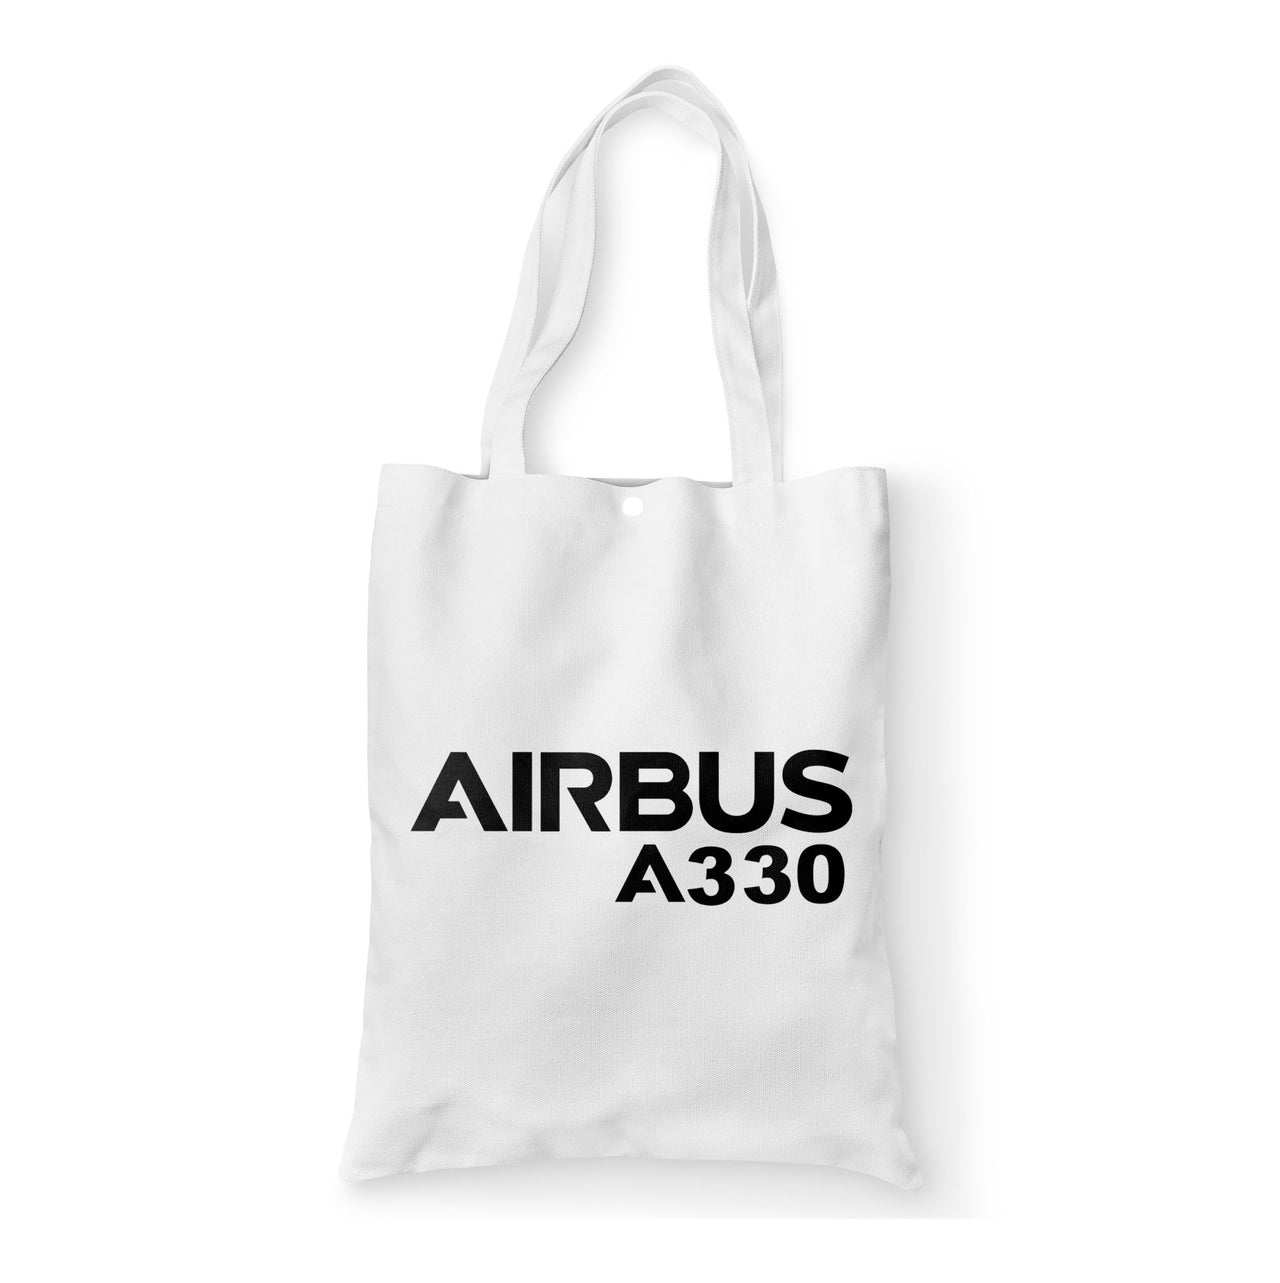 Airbus A330 & Text Designed Tote Bags